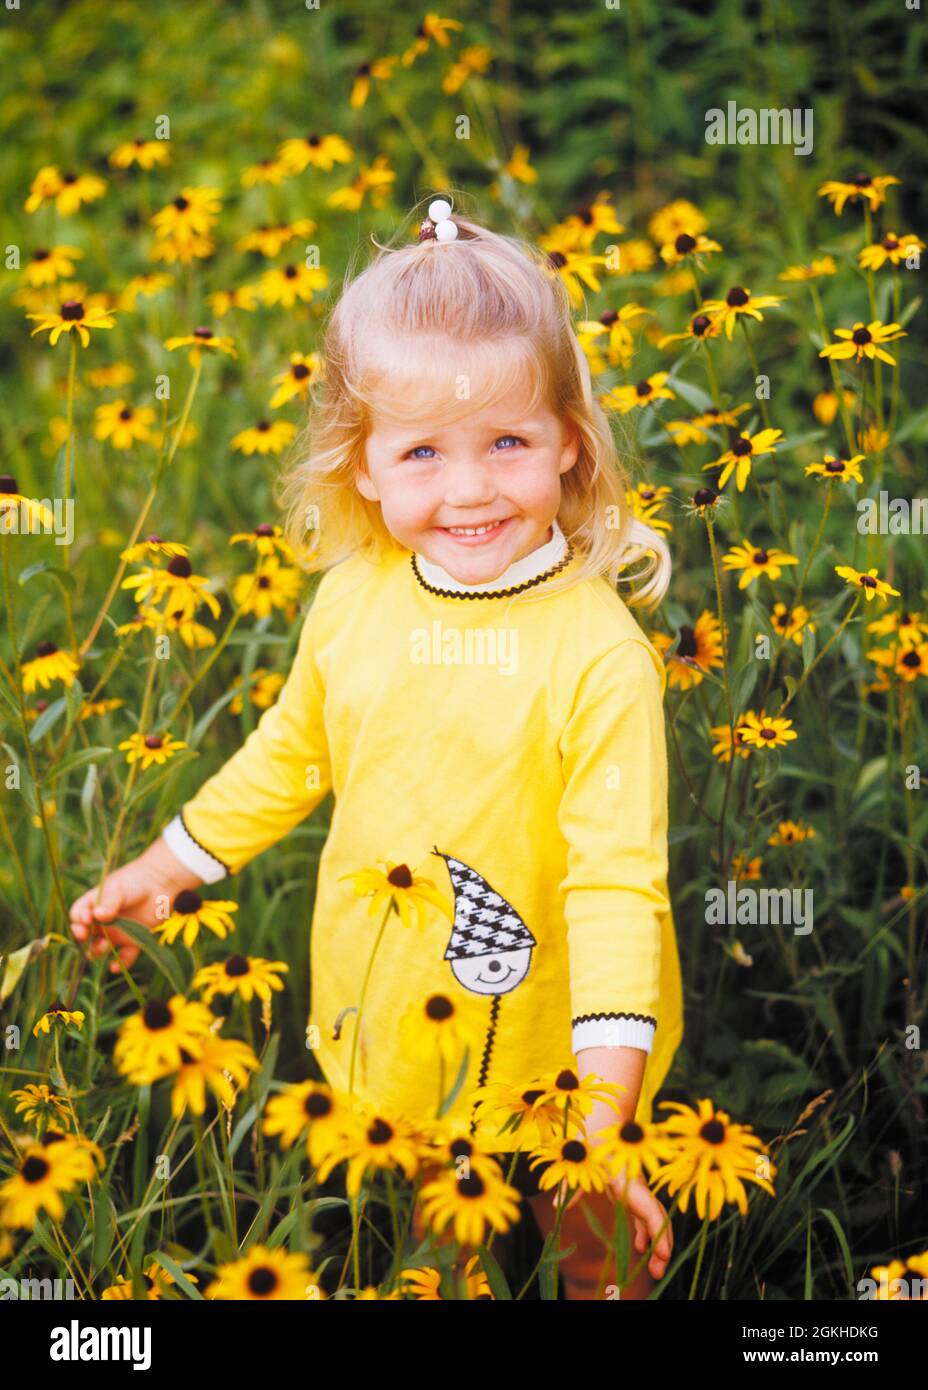 1970s SMILING BLONDE GIRL WEARING YELLOW DRESS STANDING IN FIELD OF BLACK-EYED SUSAN YELLOW DAISIES LOOKING AY CAMERA - kj4845 HAR001 HARS HEALTHINESS NATURE COPY SPACE HALF-LENGTH INSPIRATION SERENITY SPIRITUALITY CONFIDENCE EYE CONTACT DAISIES HAPPINESS WELLNESS HEAD AND SHOULDERS CHEERFUL HIGH ANGLE ADVENTURE DISCOVERY ENVIRONMENT EXCITEMENT OPPORTUNITY SMILES BLACK-EYED CONNECTION SUSAN CONCEPTUAL JOYFUL CHARMING GROWTH JUVENILES CAUCASIAN ETHNICITY EXPLORING HAR001 INNOCENT OLD FASHIONED Stock Photo